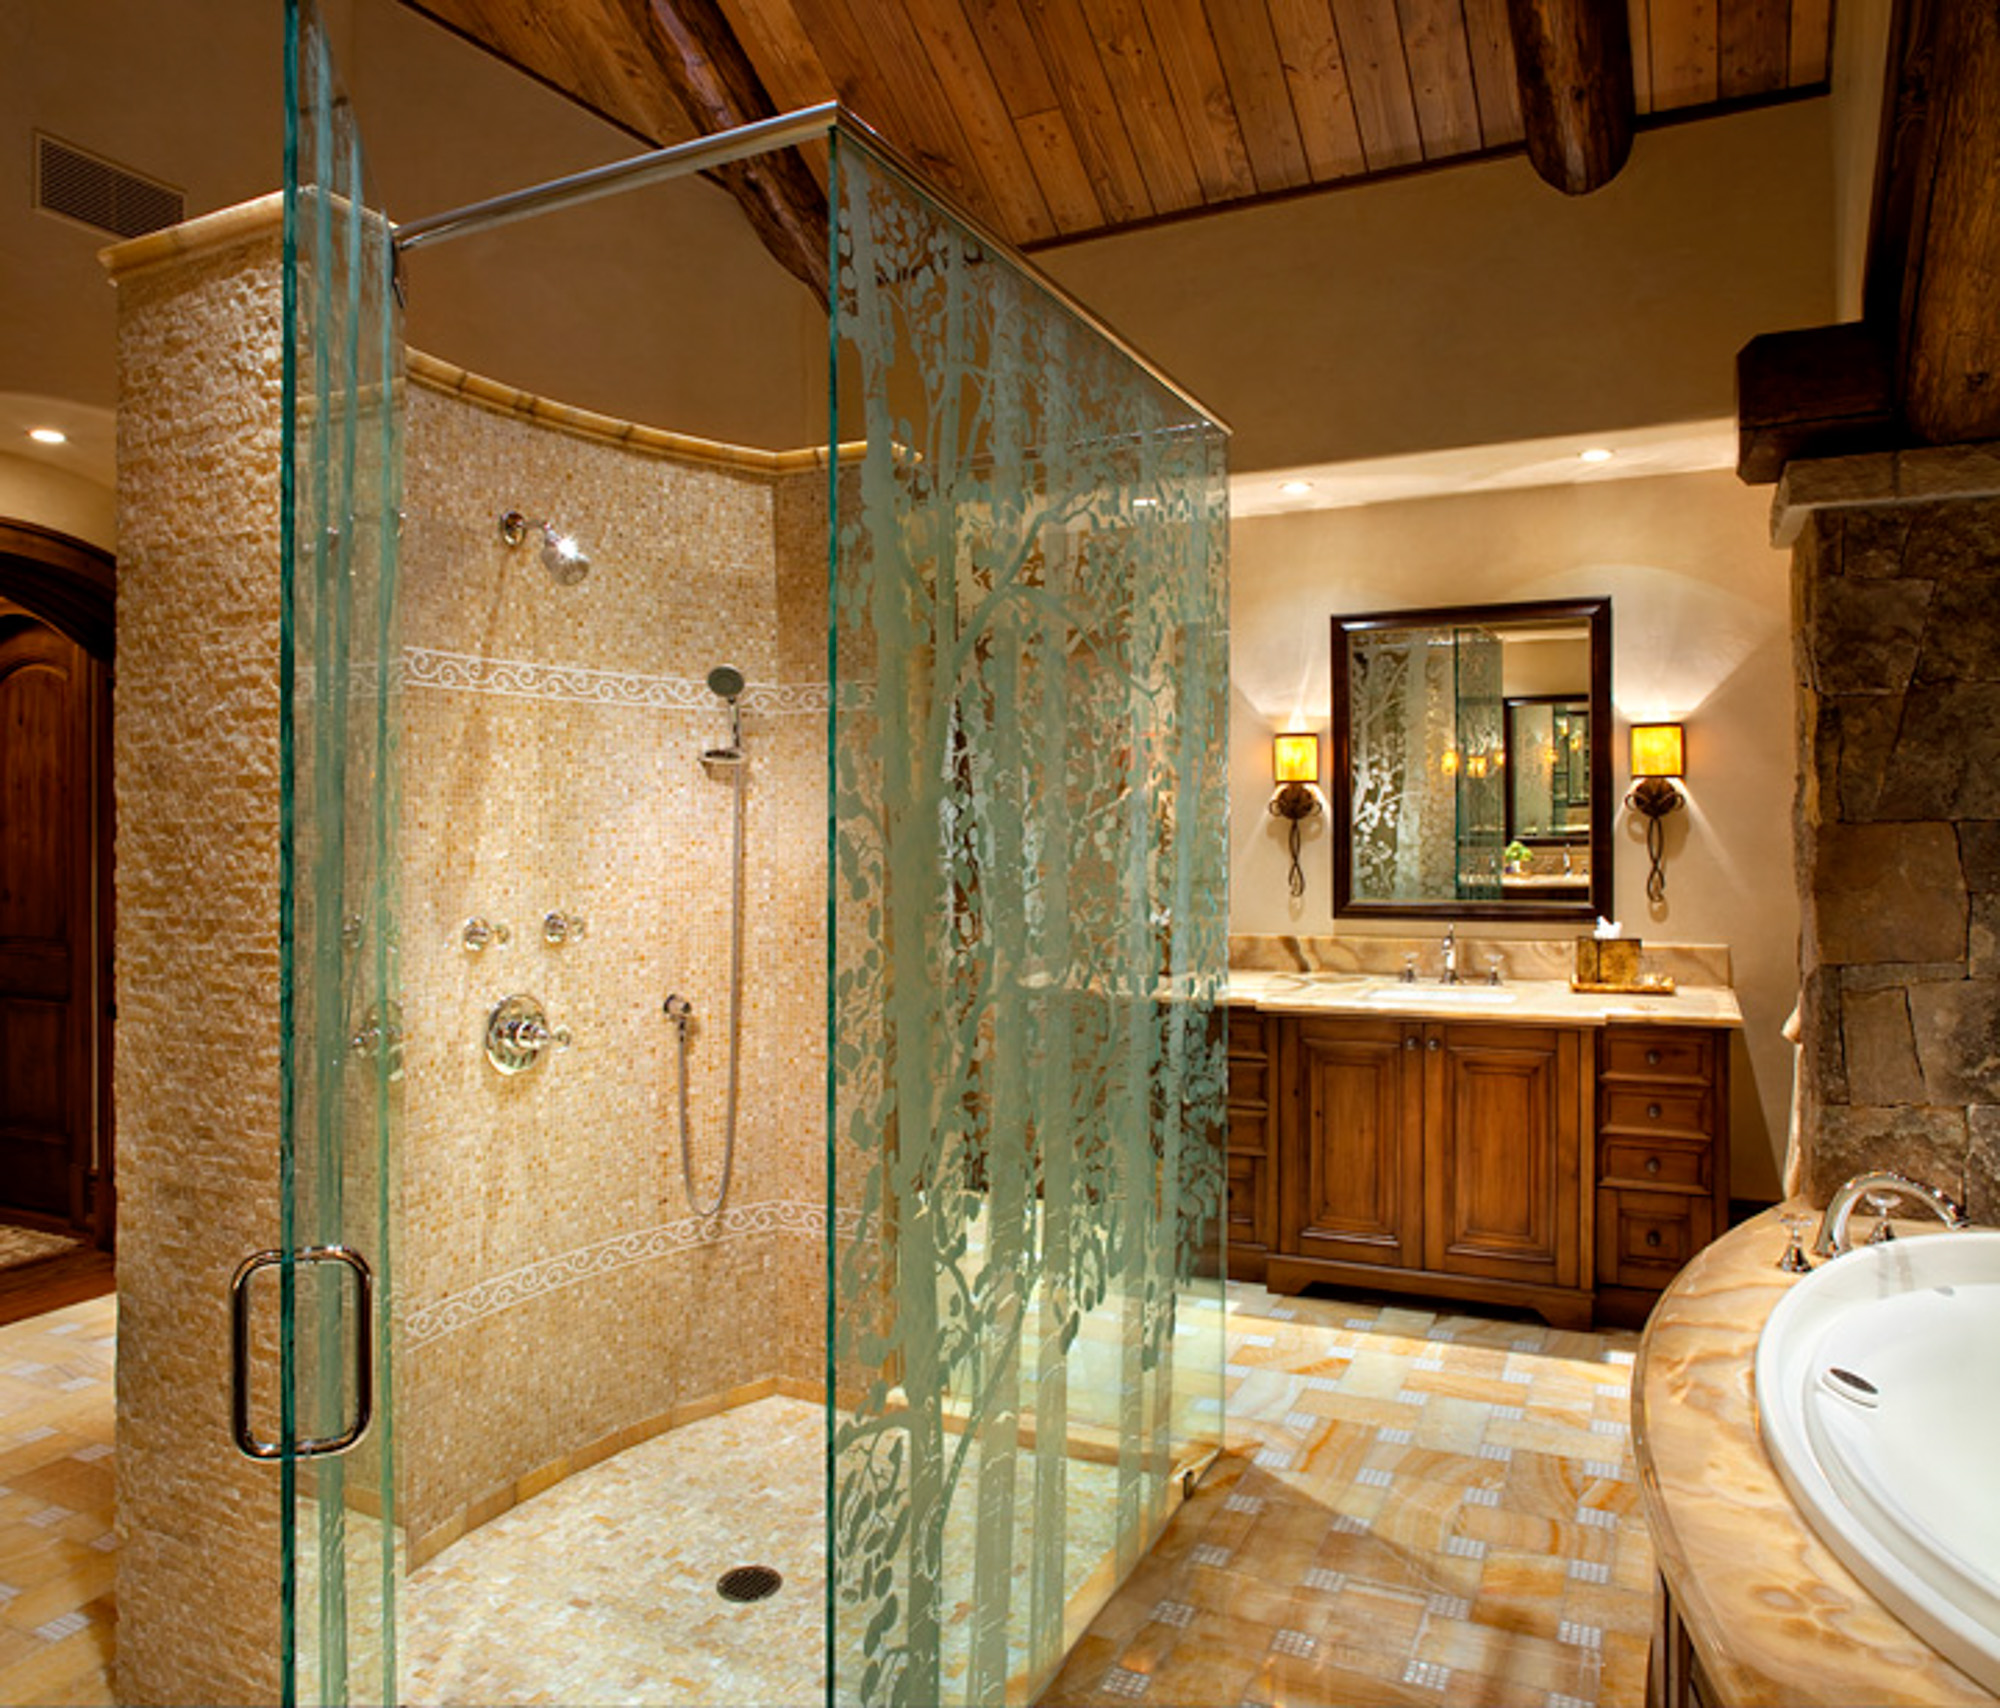 A view of the custom aspen print glass door in the shower at bachelor gulch